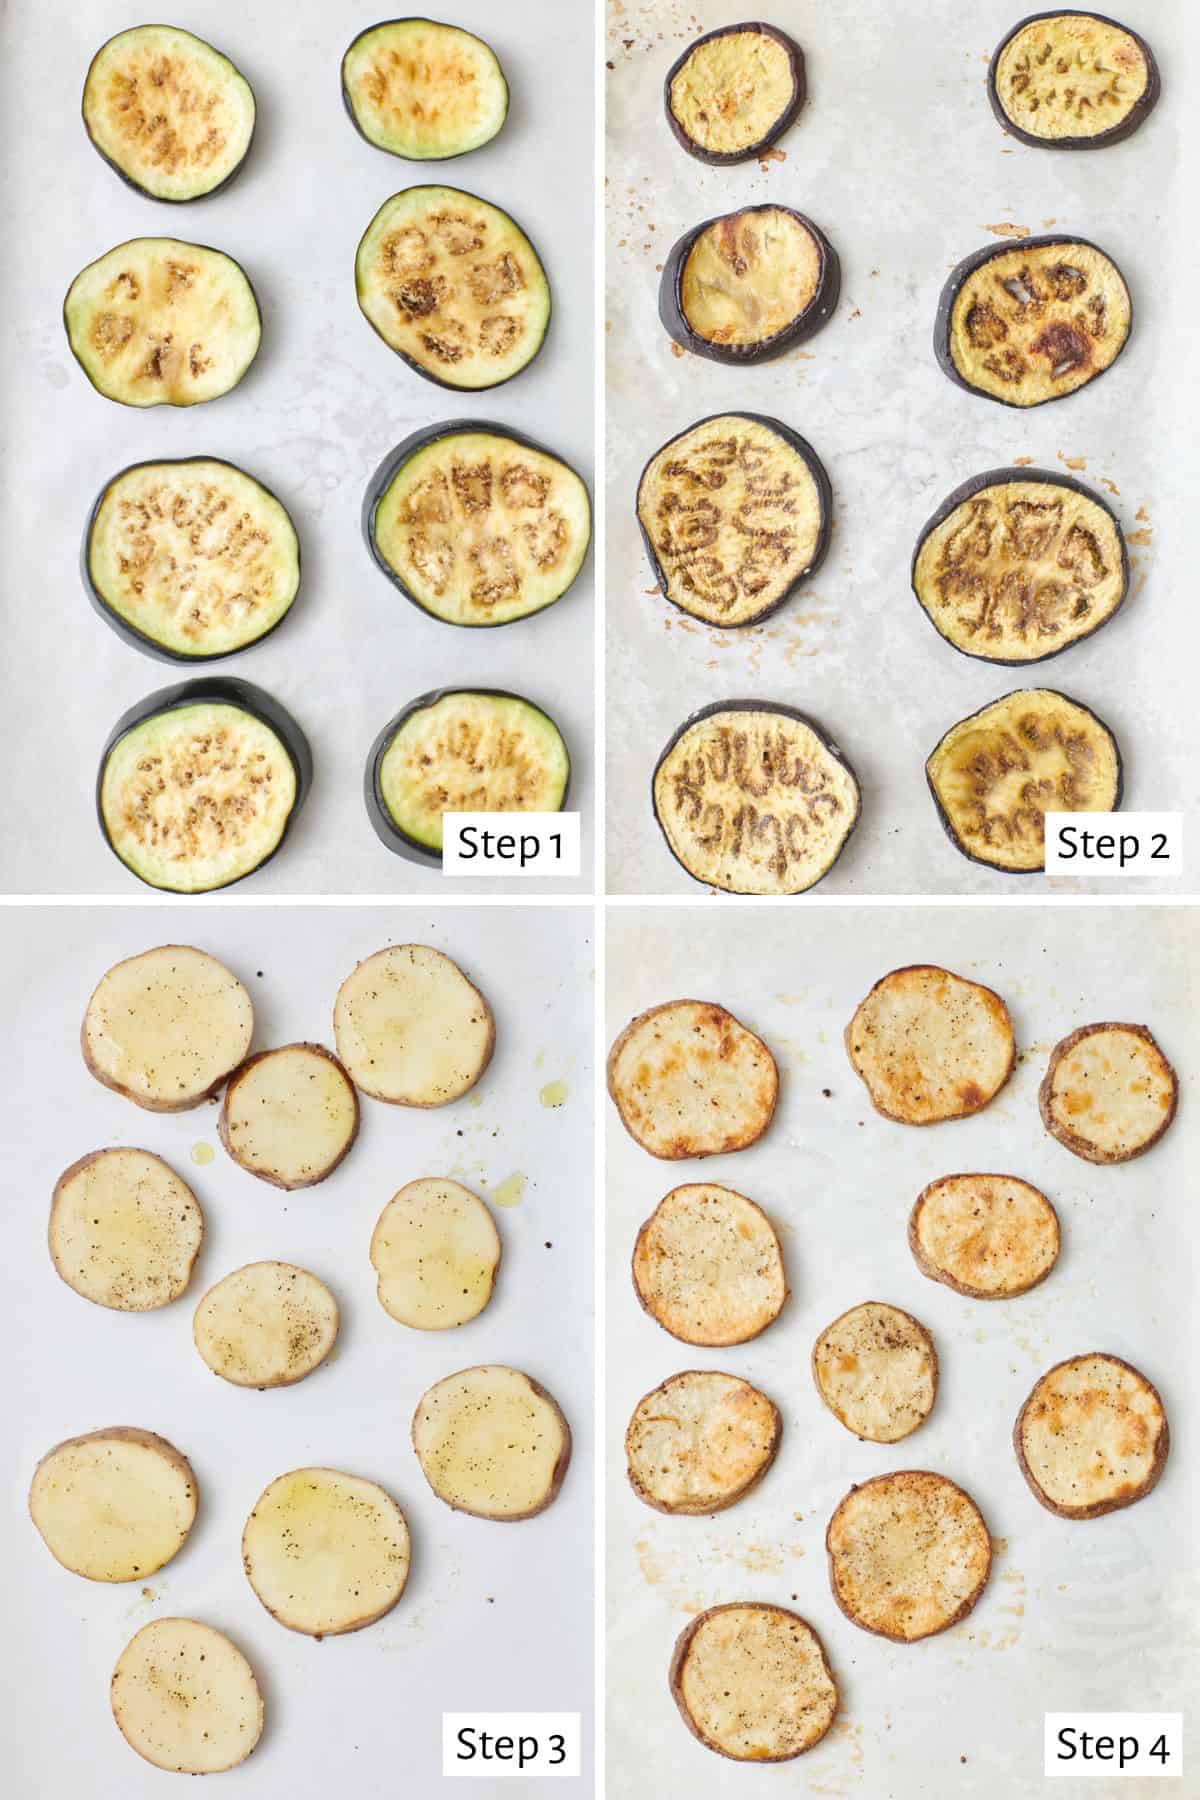 4 image collage preparing vegetables for layering in recipe: 1- eggplant slices on a parchment lined baking sheet before baking, 2- after baking, 3- potatoes slices before baking, 4- after baking.